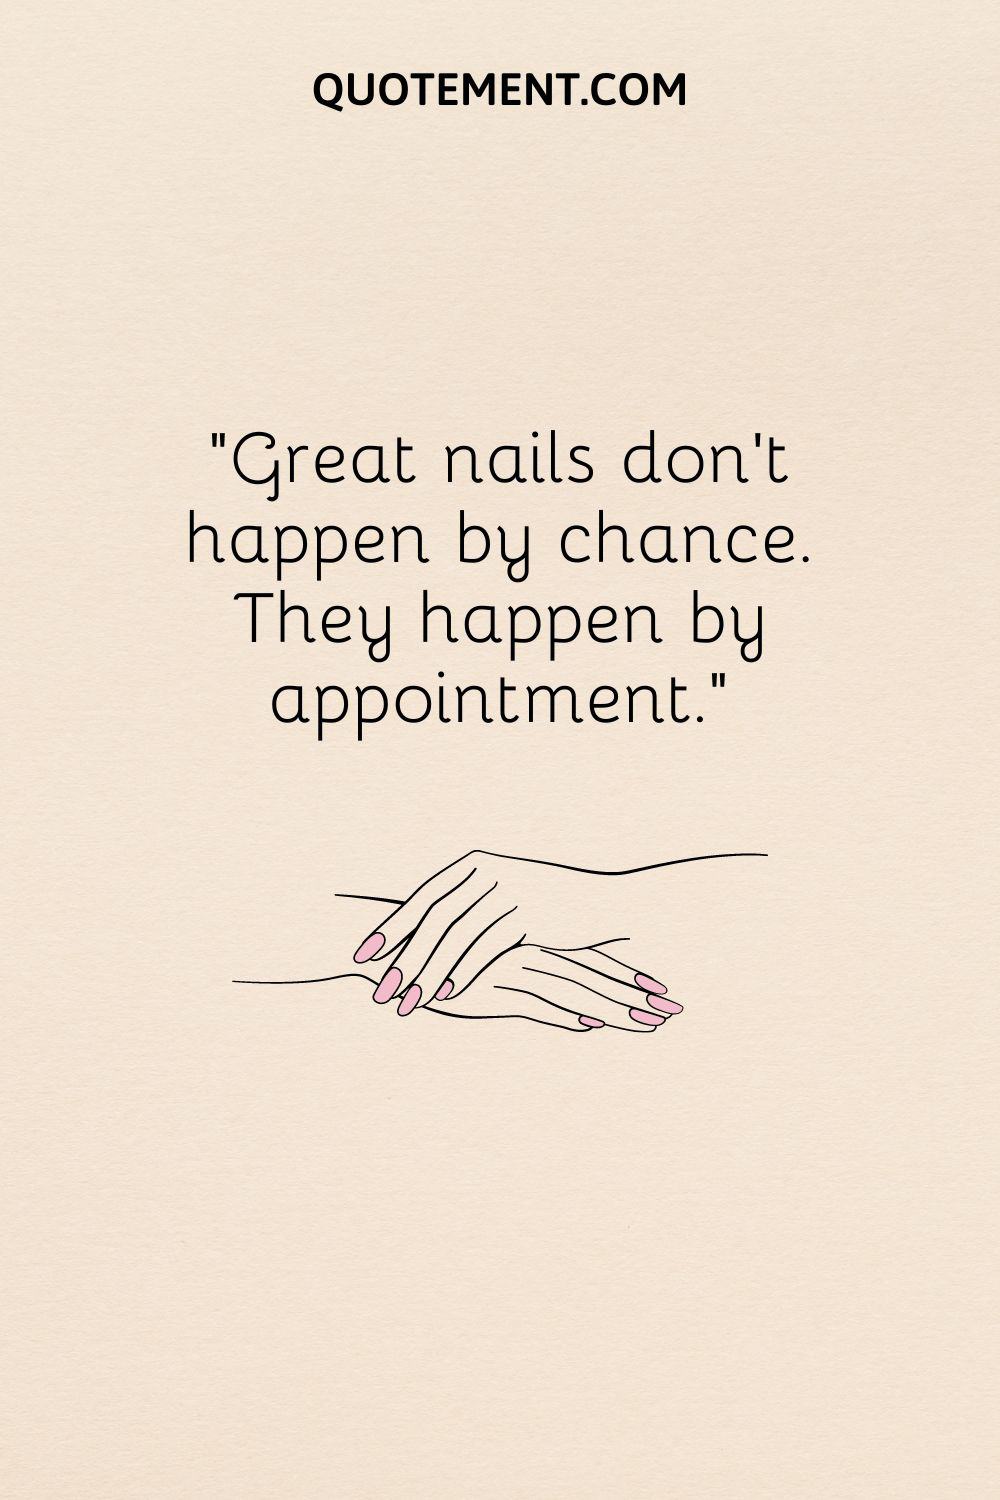 Great nails don’t happen by chance. They happen by appointment.